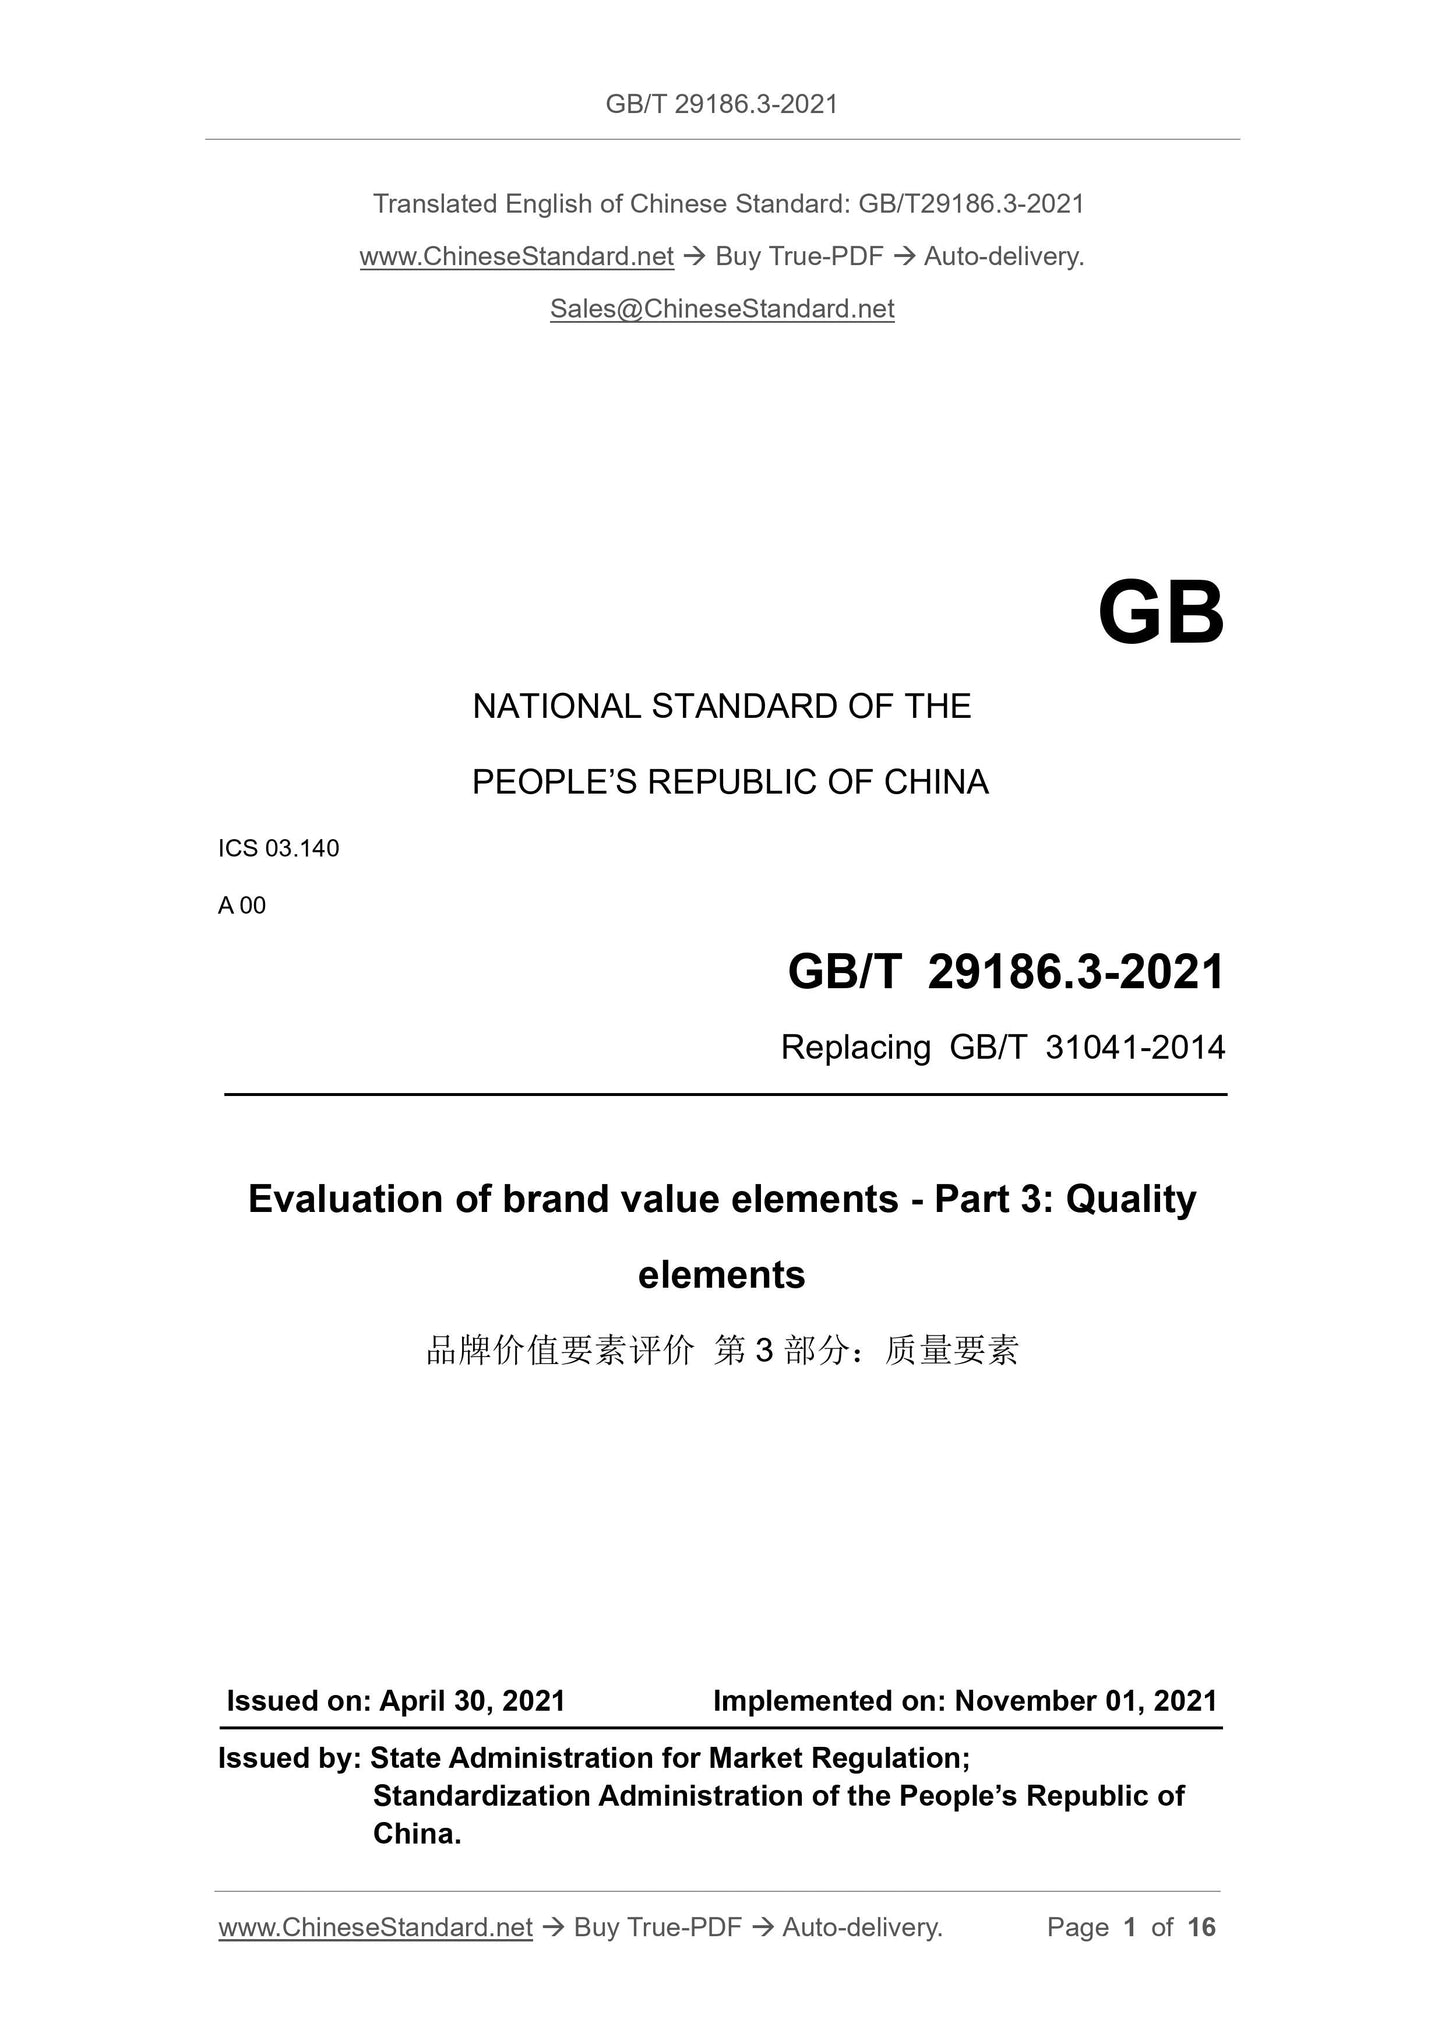 GB/T 29186.3-2021 Page 1